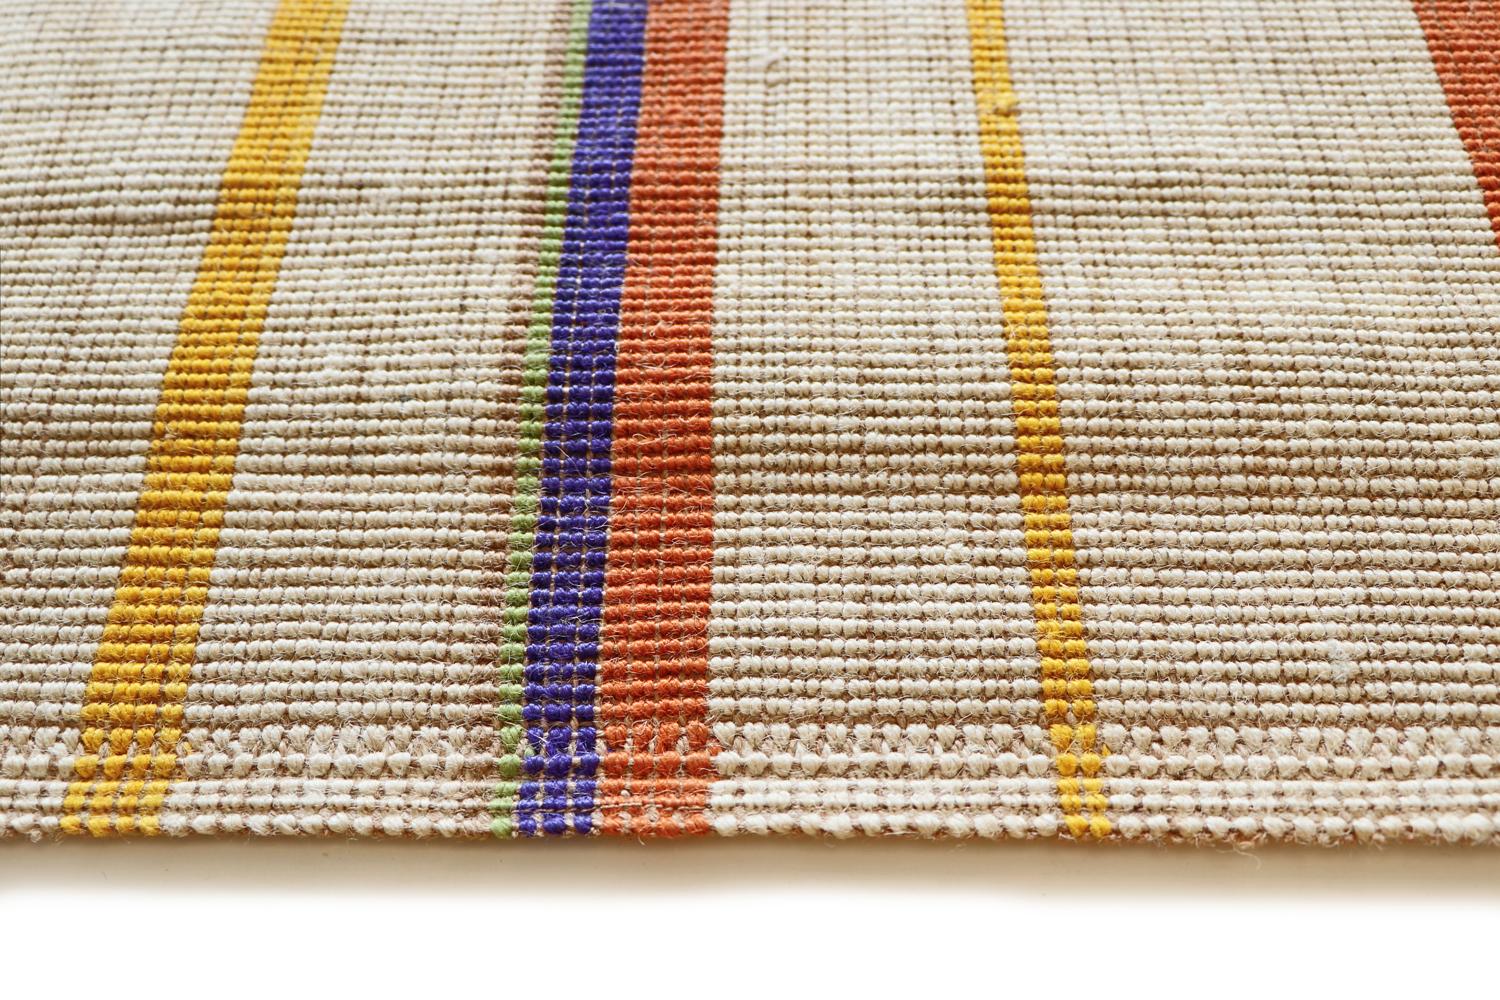 21st Cent Striped Natural Fibers Rug by Deanna Comellini In Stock 200x300 cm In New Condition For Sale In Bologna, IT